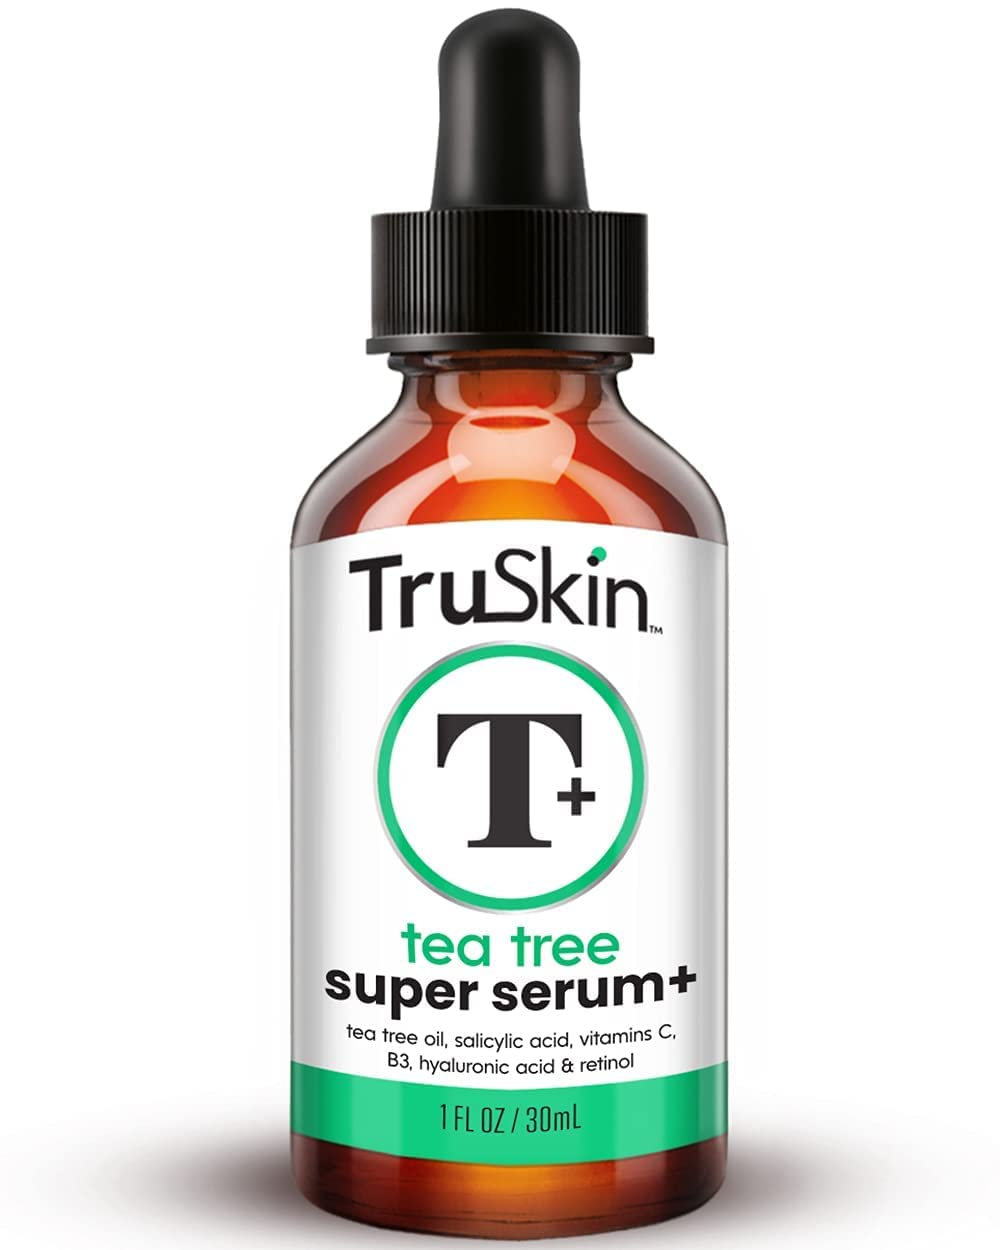 TruSkin Tea Tree Super Serum for Face – Clarifying Facial Serum with Tea Tree Oil, Salicylic Acid, Hyaluronic Acid and Niacinamide – Skin Care Made to Unclog Pores & Soothe Unhappy Skin, 1 fl oz